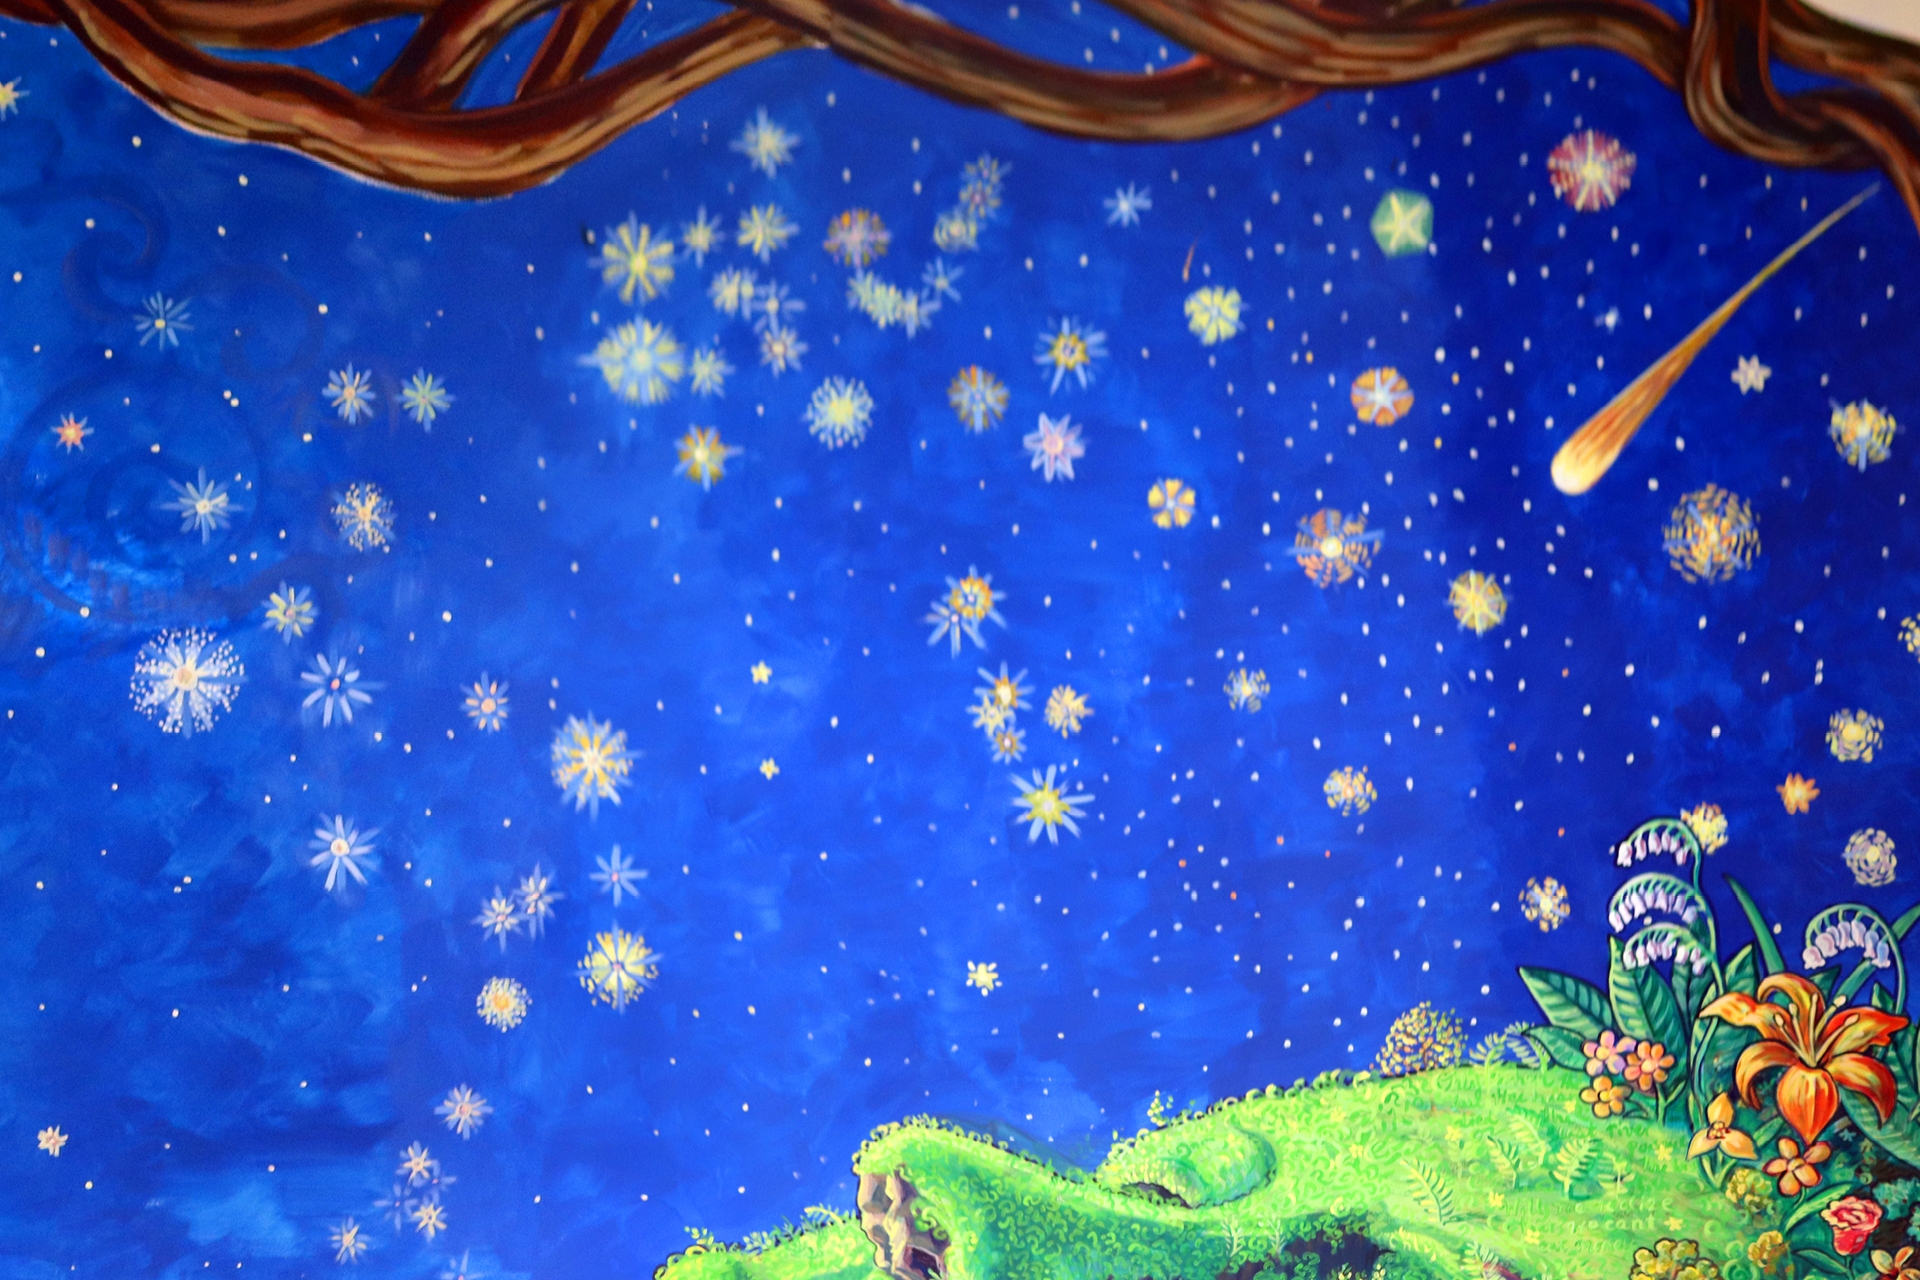 Stars painted on a rich blue background. In front of the background at the top of the picture there is a brown, gnarled tree branch. In front of the stars at the bottom of the picture there is a profile of a face looking up. The face is a hill, with grass for skin and flowers for hair. The face's eyes are closed.